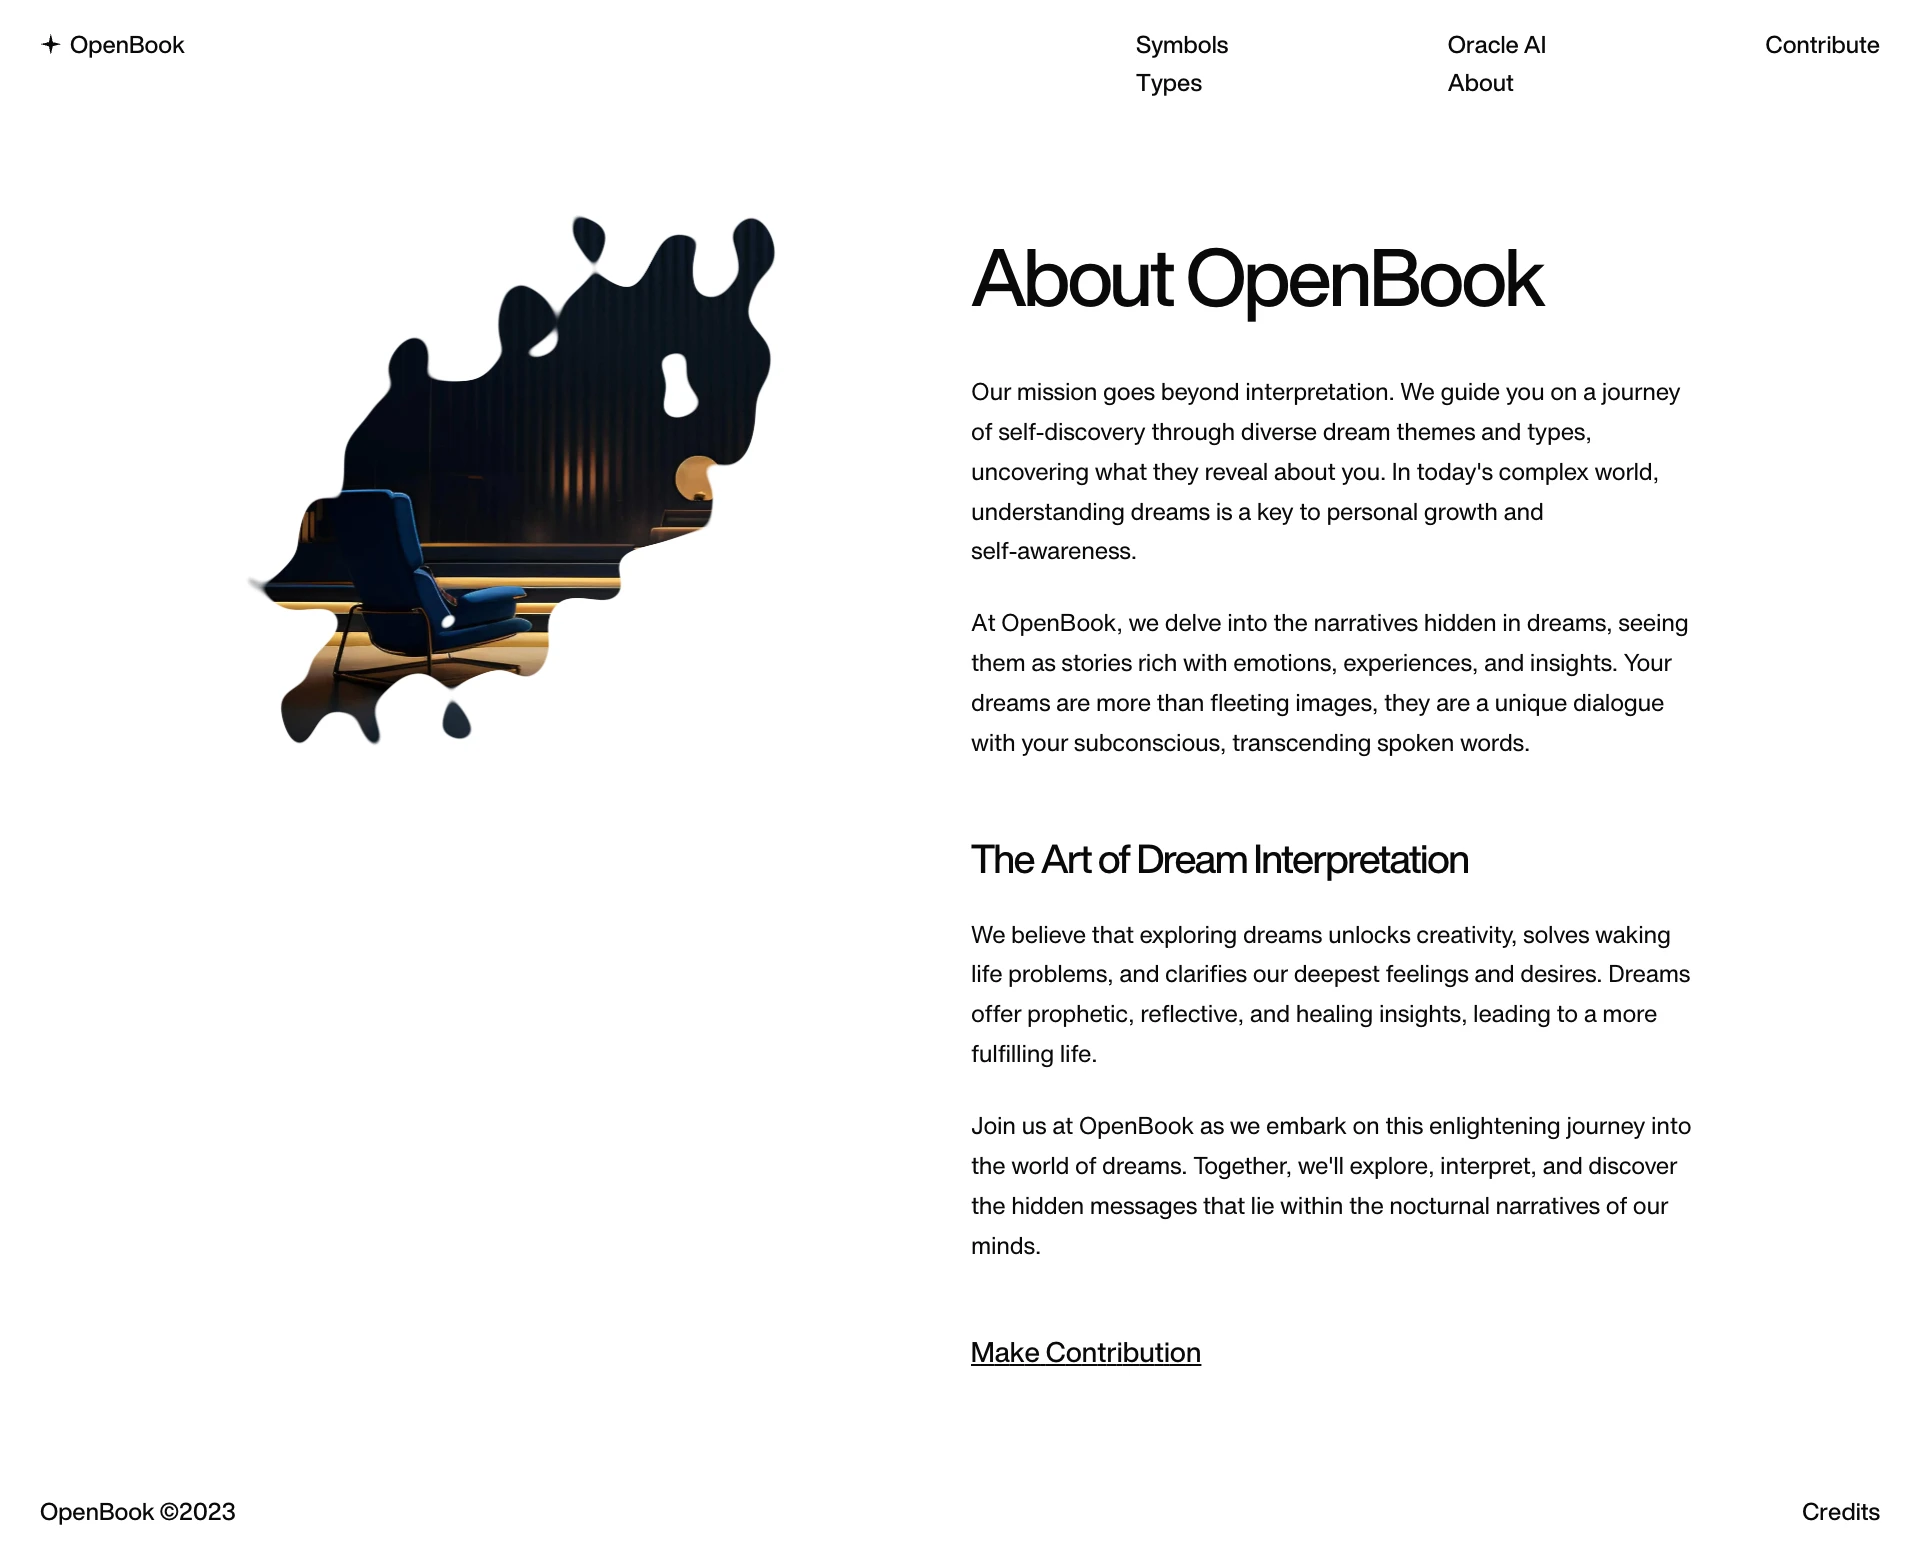 OpenBook Landing Page Example: AI powered online guide to aid interpretation of common themes and symbols that appear in dreams.